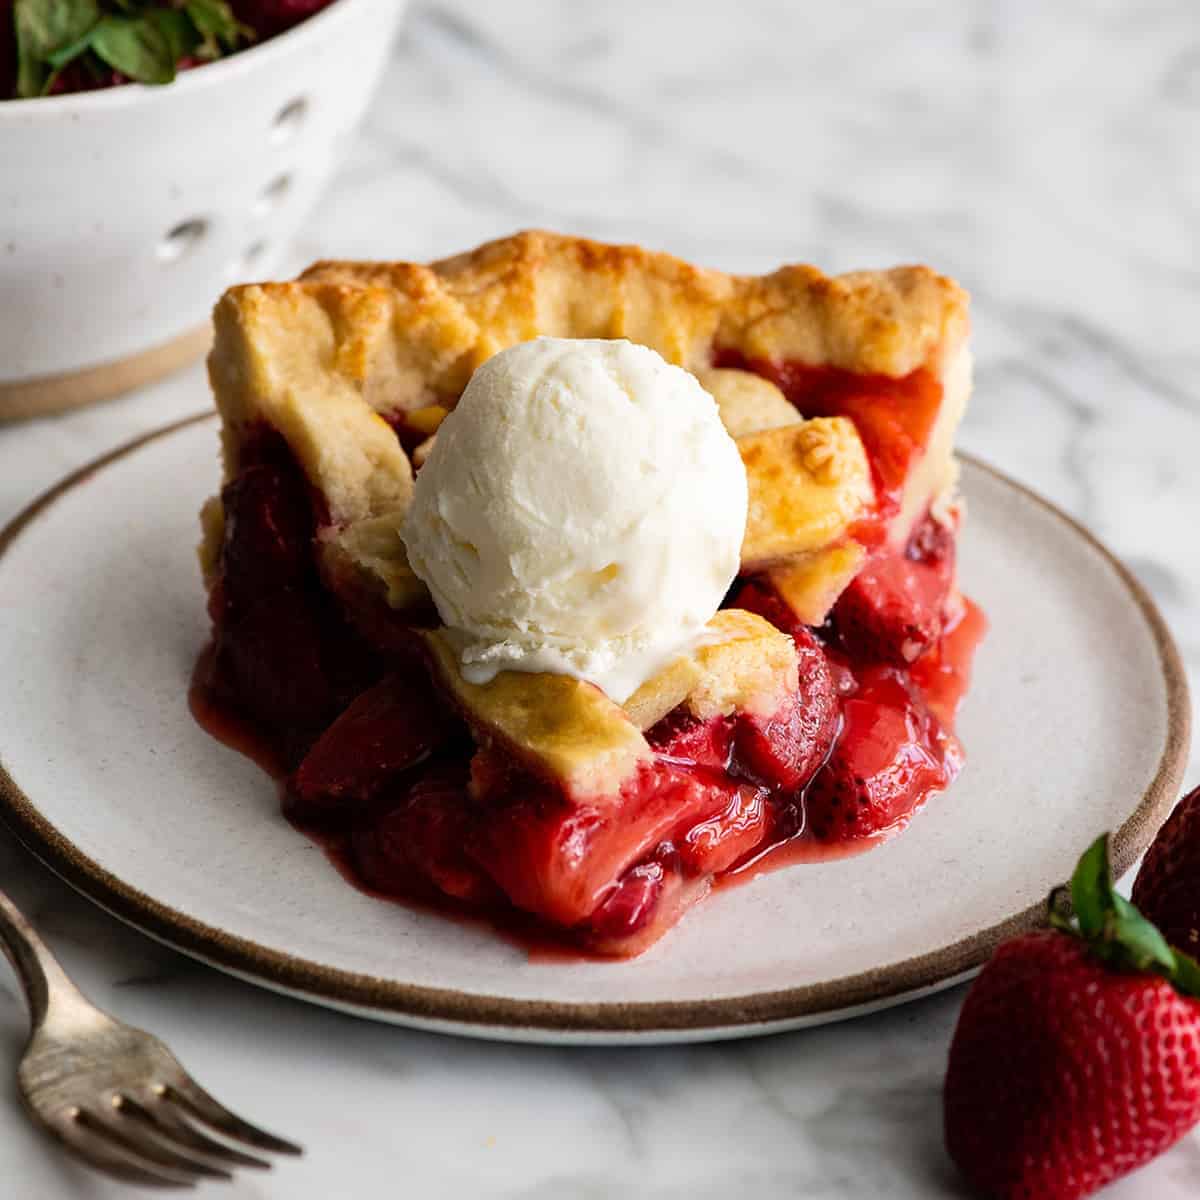 slice of strawberry pie topped with a scoop of vanilla ice cream.